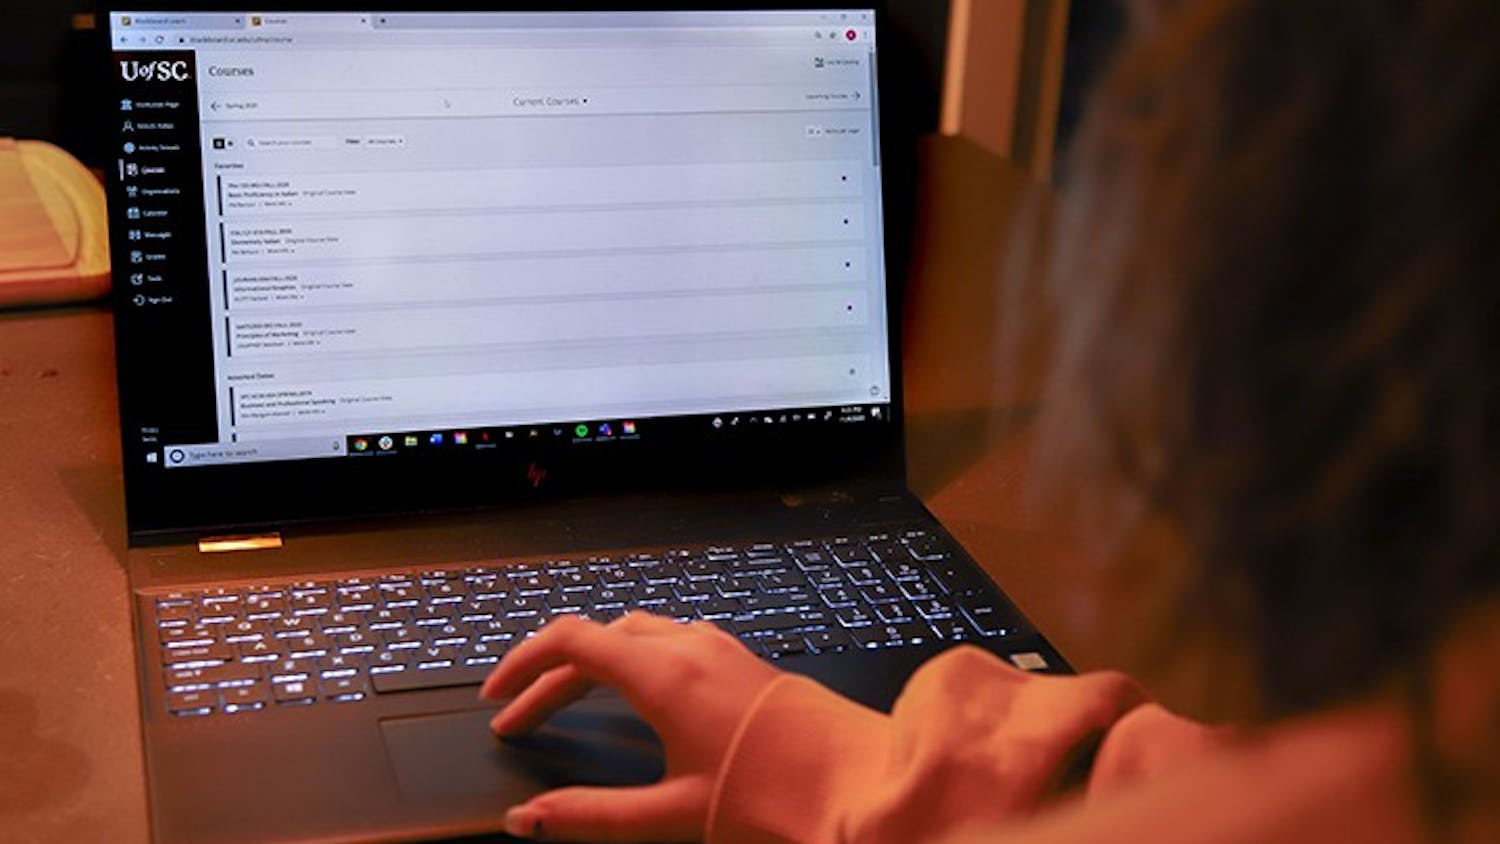 A student uses Blackboard on a laptop. Blackboard is one of the ways teachers share course information, assignments and tests, and sometimes classes are held using Blackboard Collaborate.